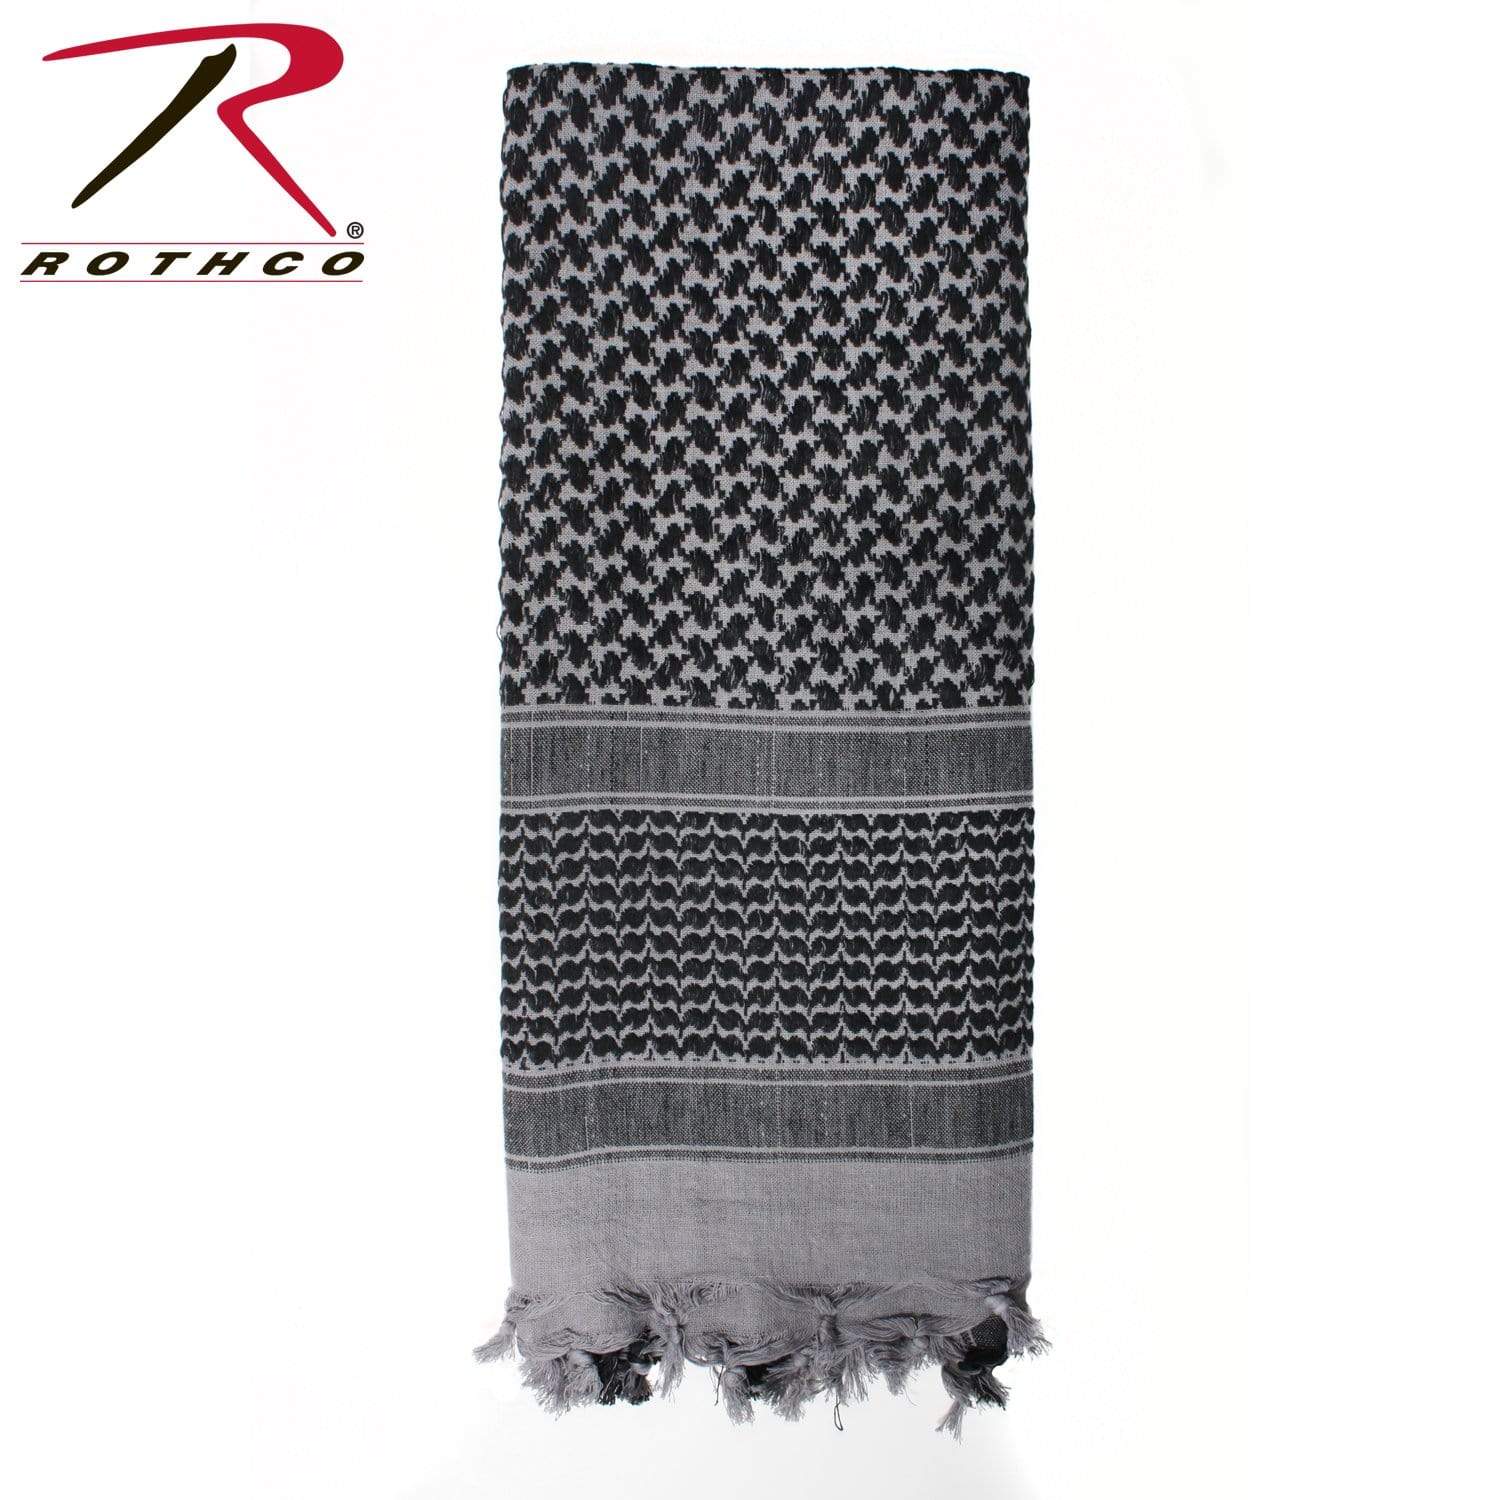 Rothco Shemagh Tactical Desert Keffiyeh Scarf - Grey - Eminent Paintball And Airsoft